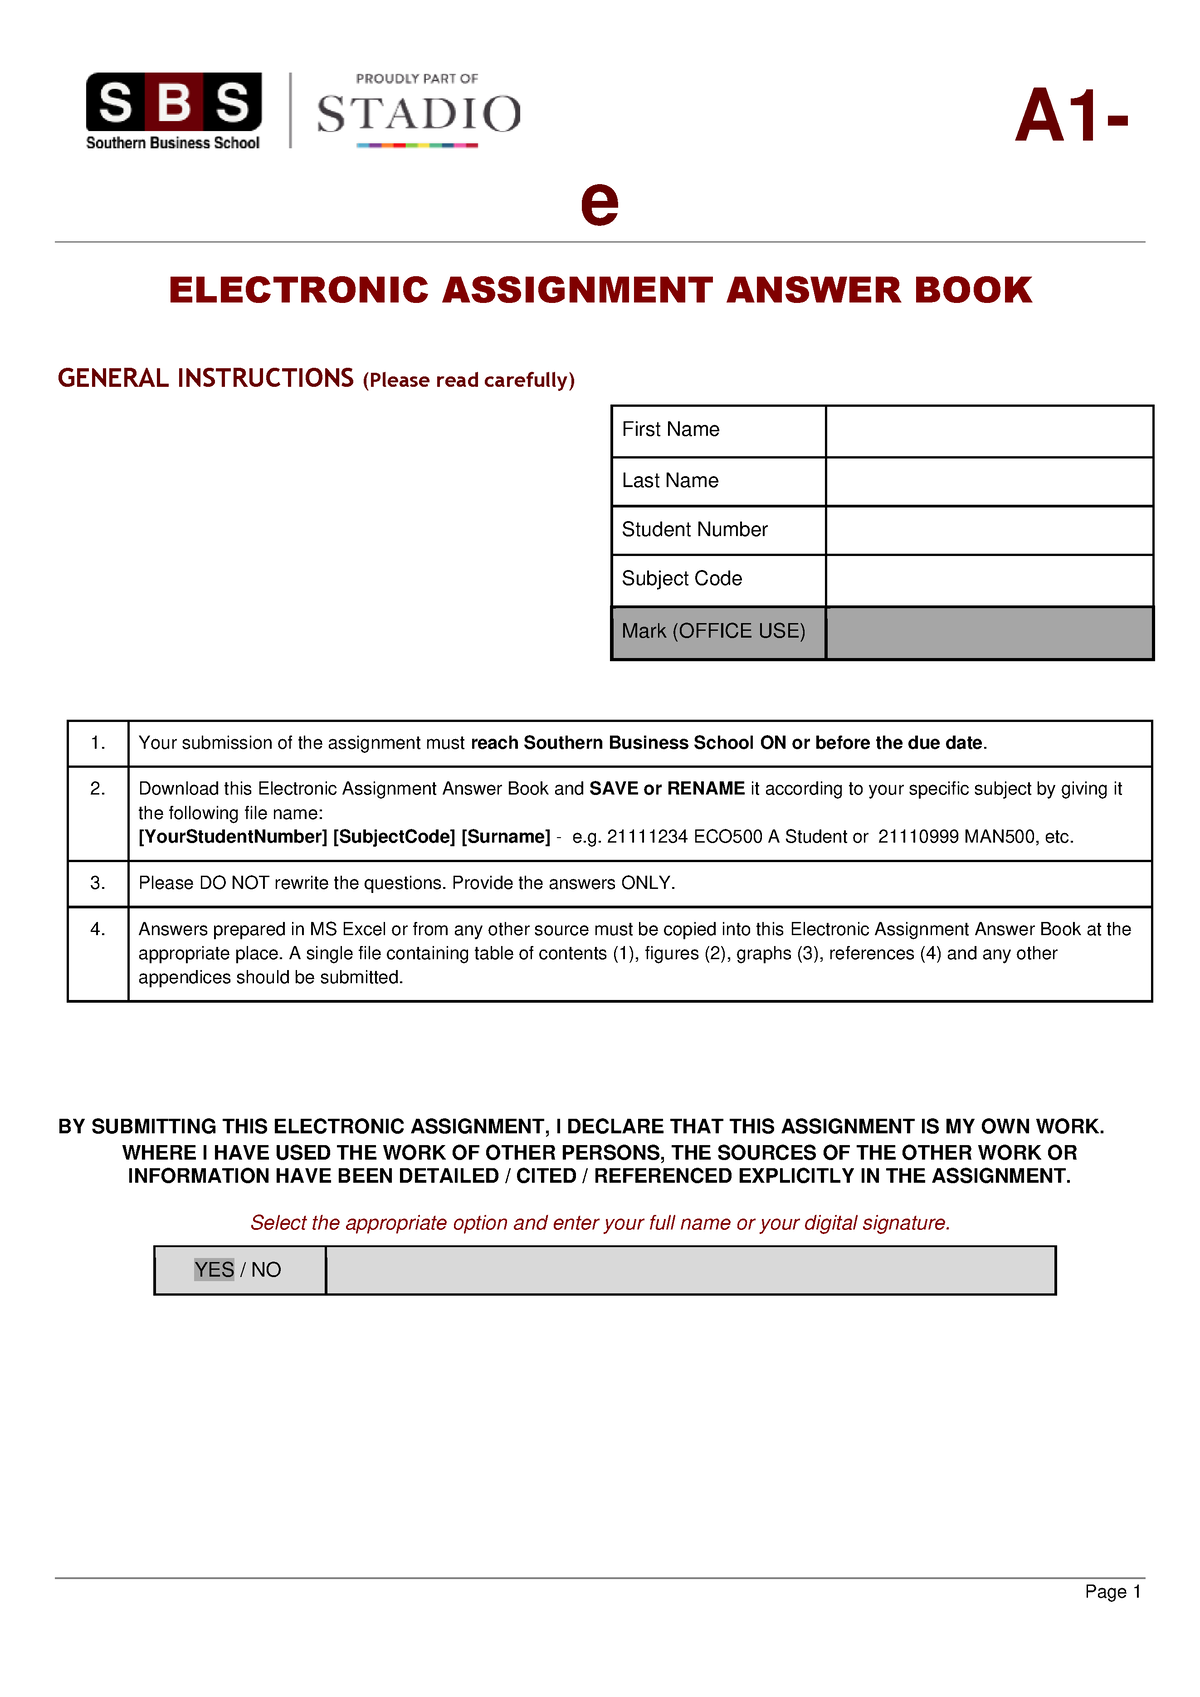 electronic assignment answer book